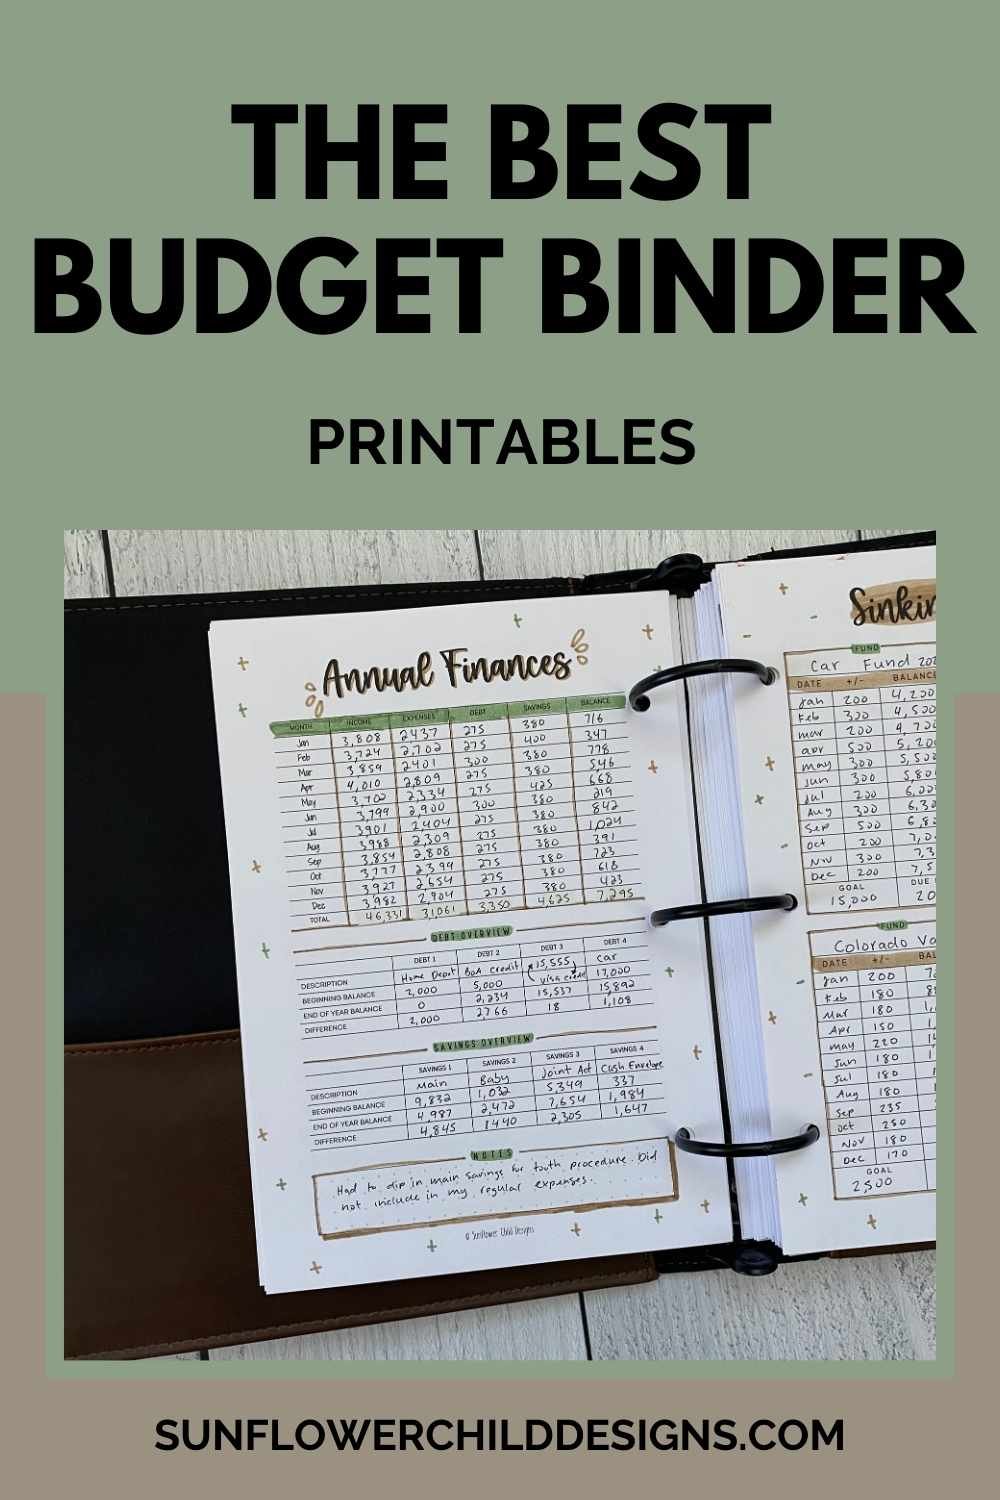 Unleash Financial Freedom: The Ultimate Budget Binder for Year-round Savings!